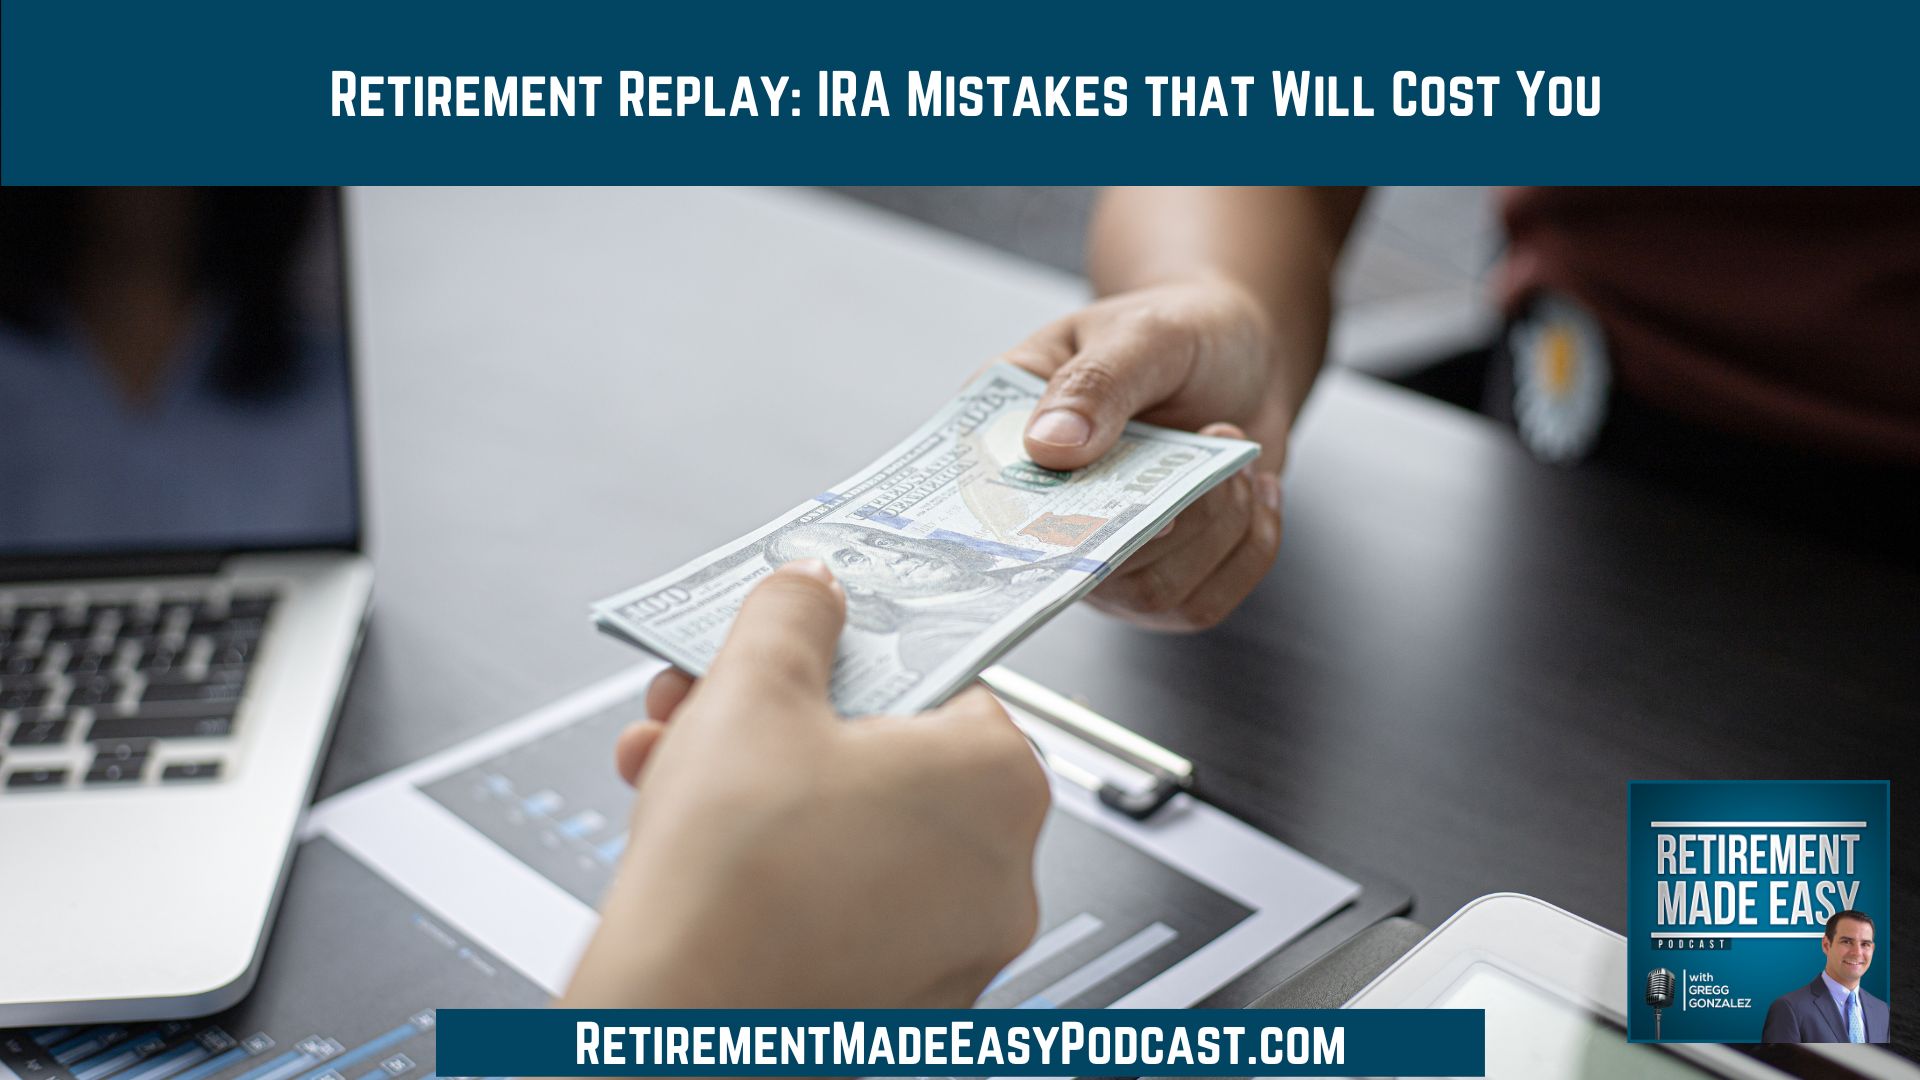 Retirement Replay - IRA Mistakes that Will Cost You